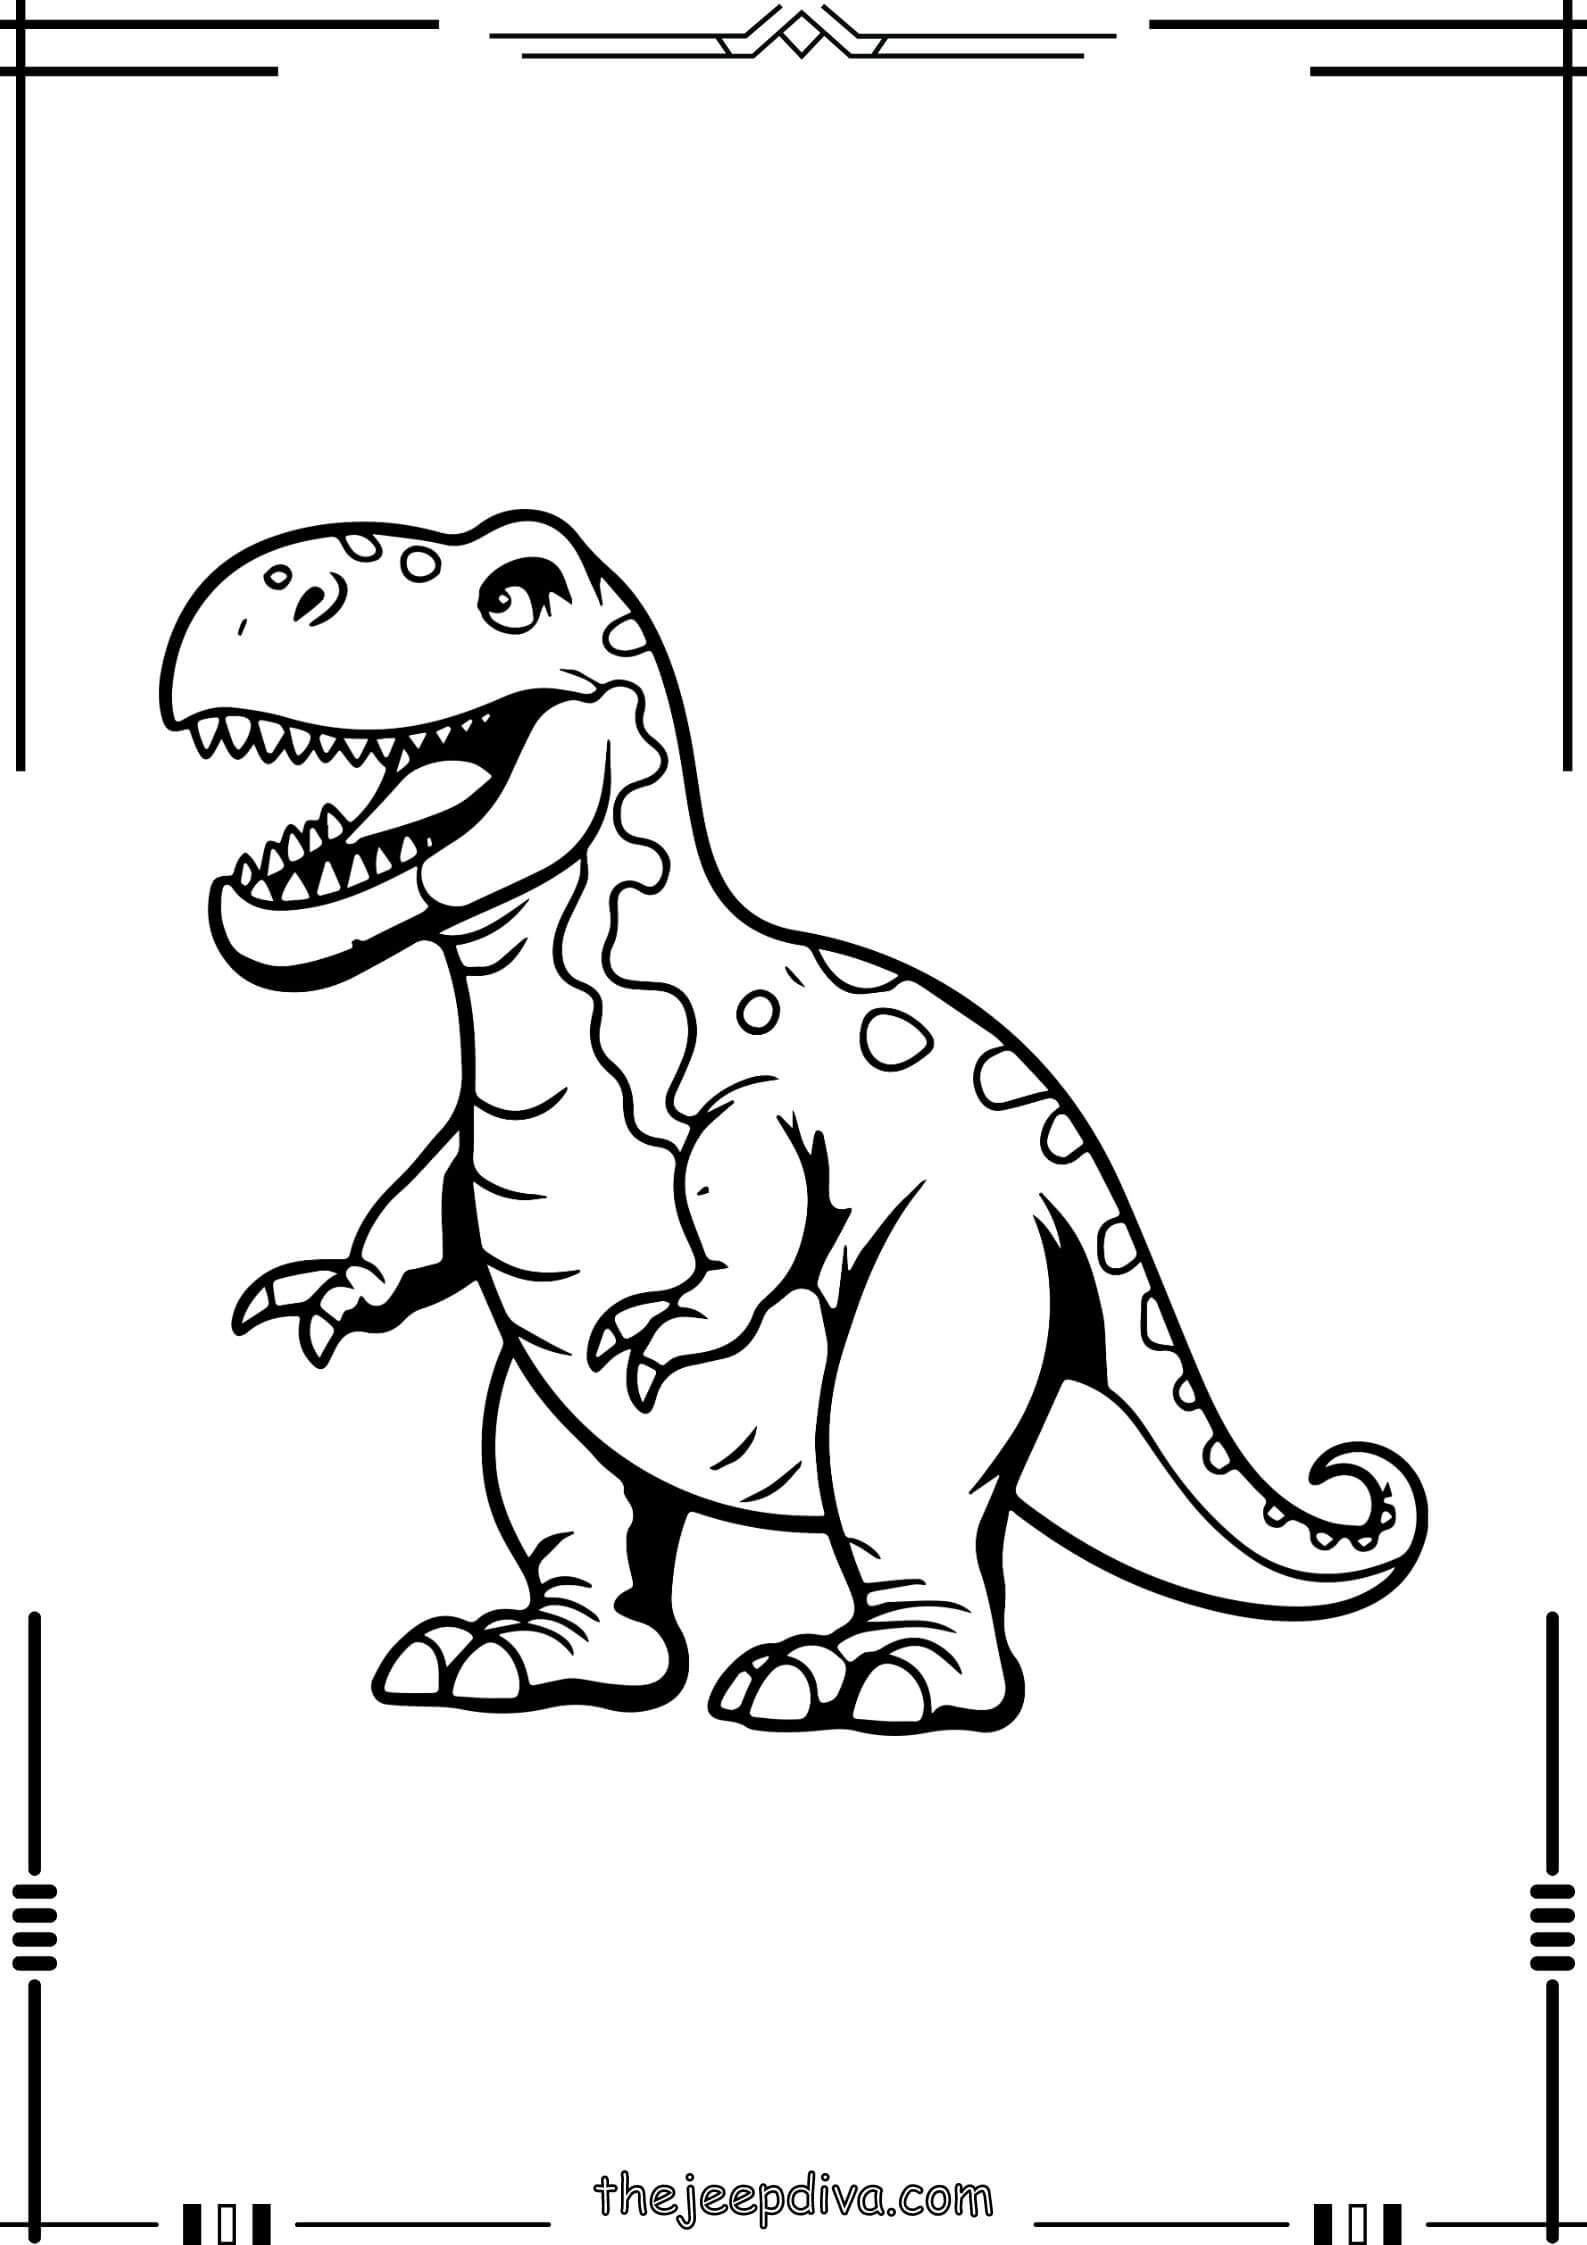 Dinosaur-Colouring-Pages-Easy-9